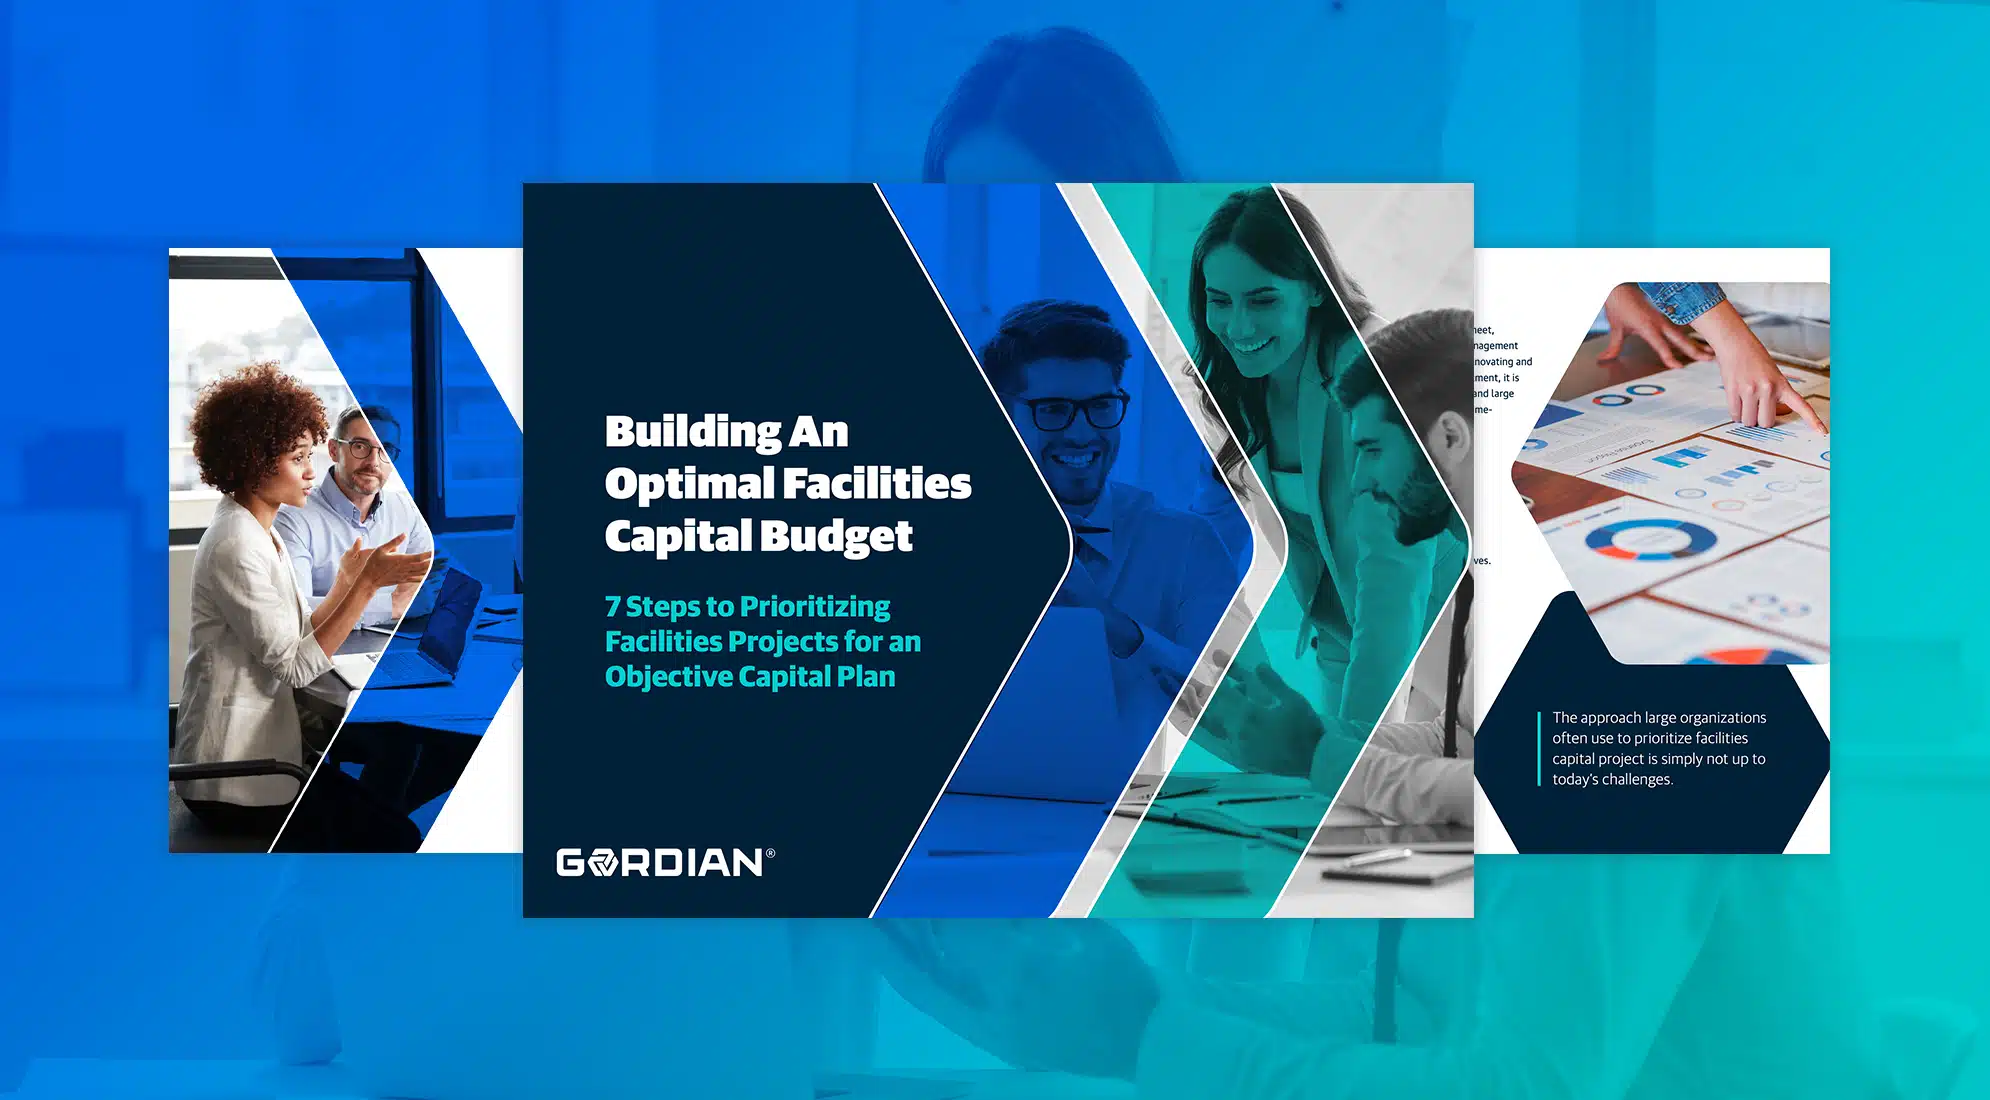 Building an Optimal Facilities Capital Budget: 7 Steps to Prioritizing Facilities Projects for an Objective Capital Plan 3